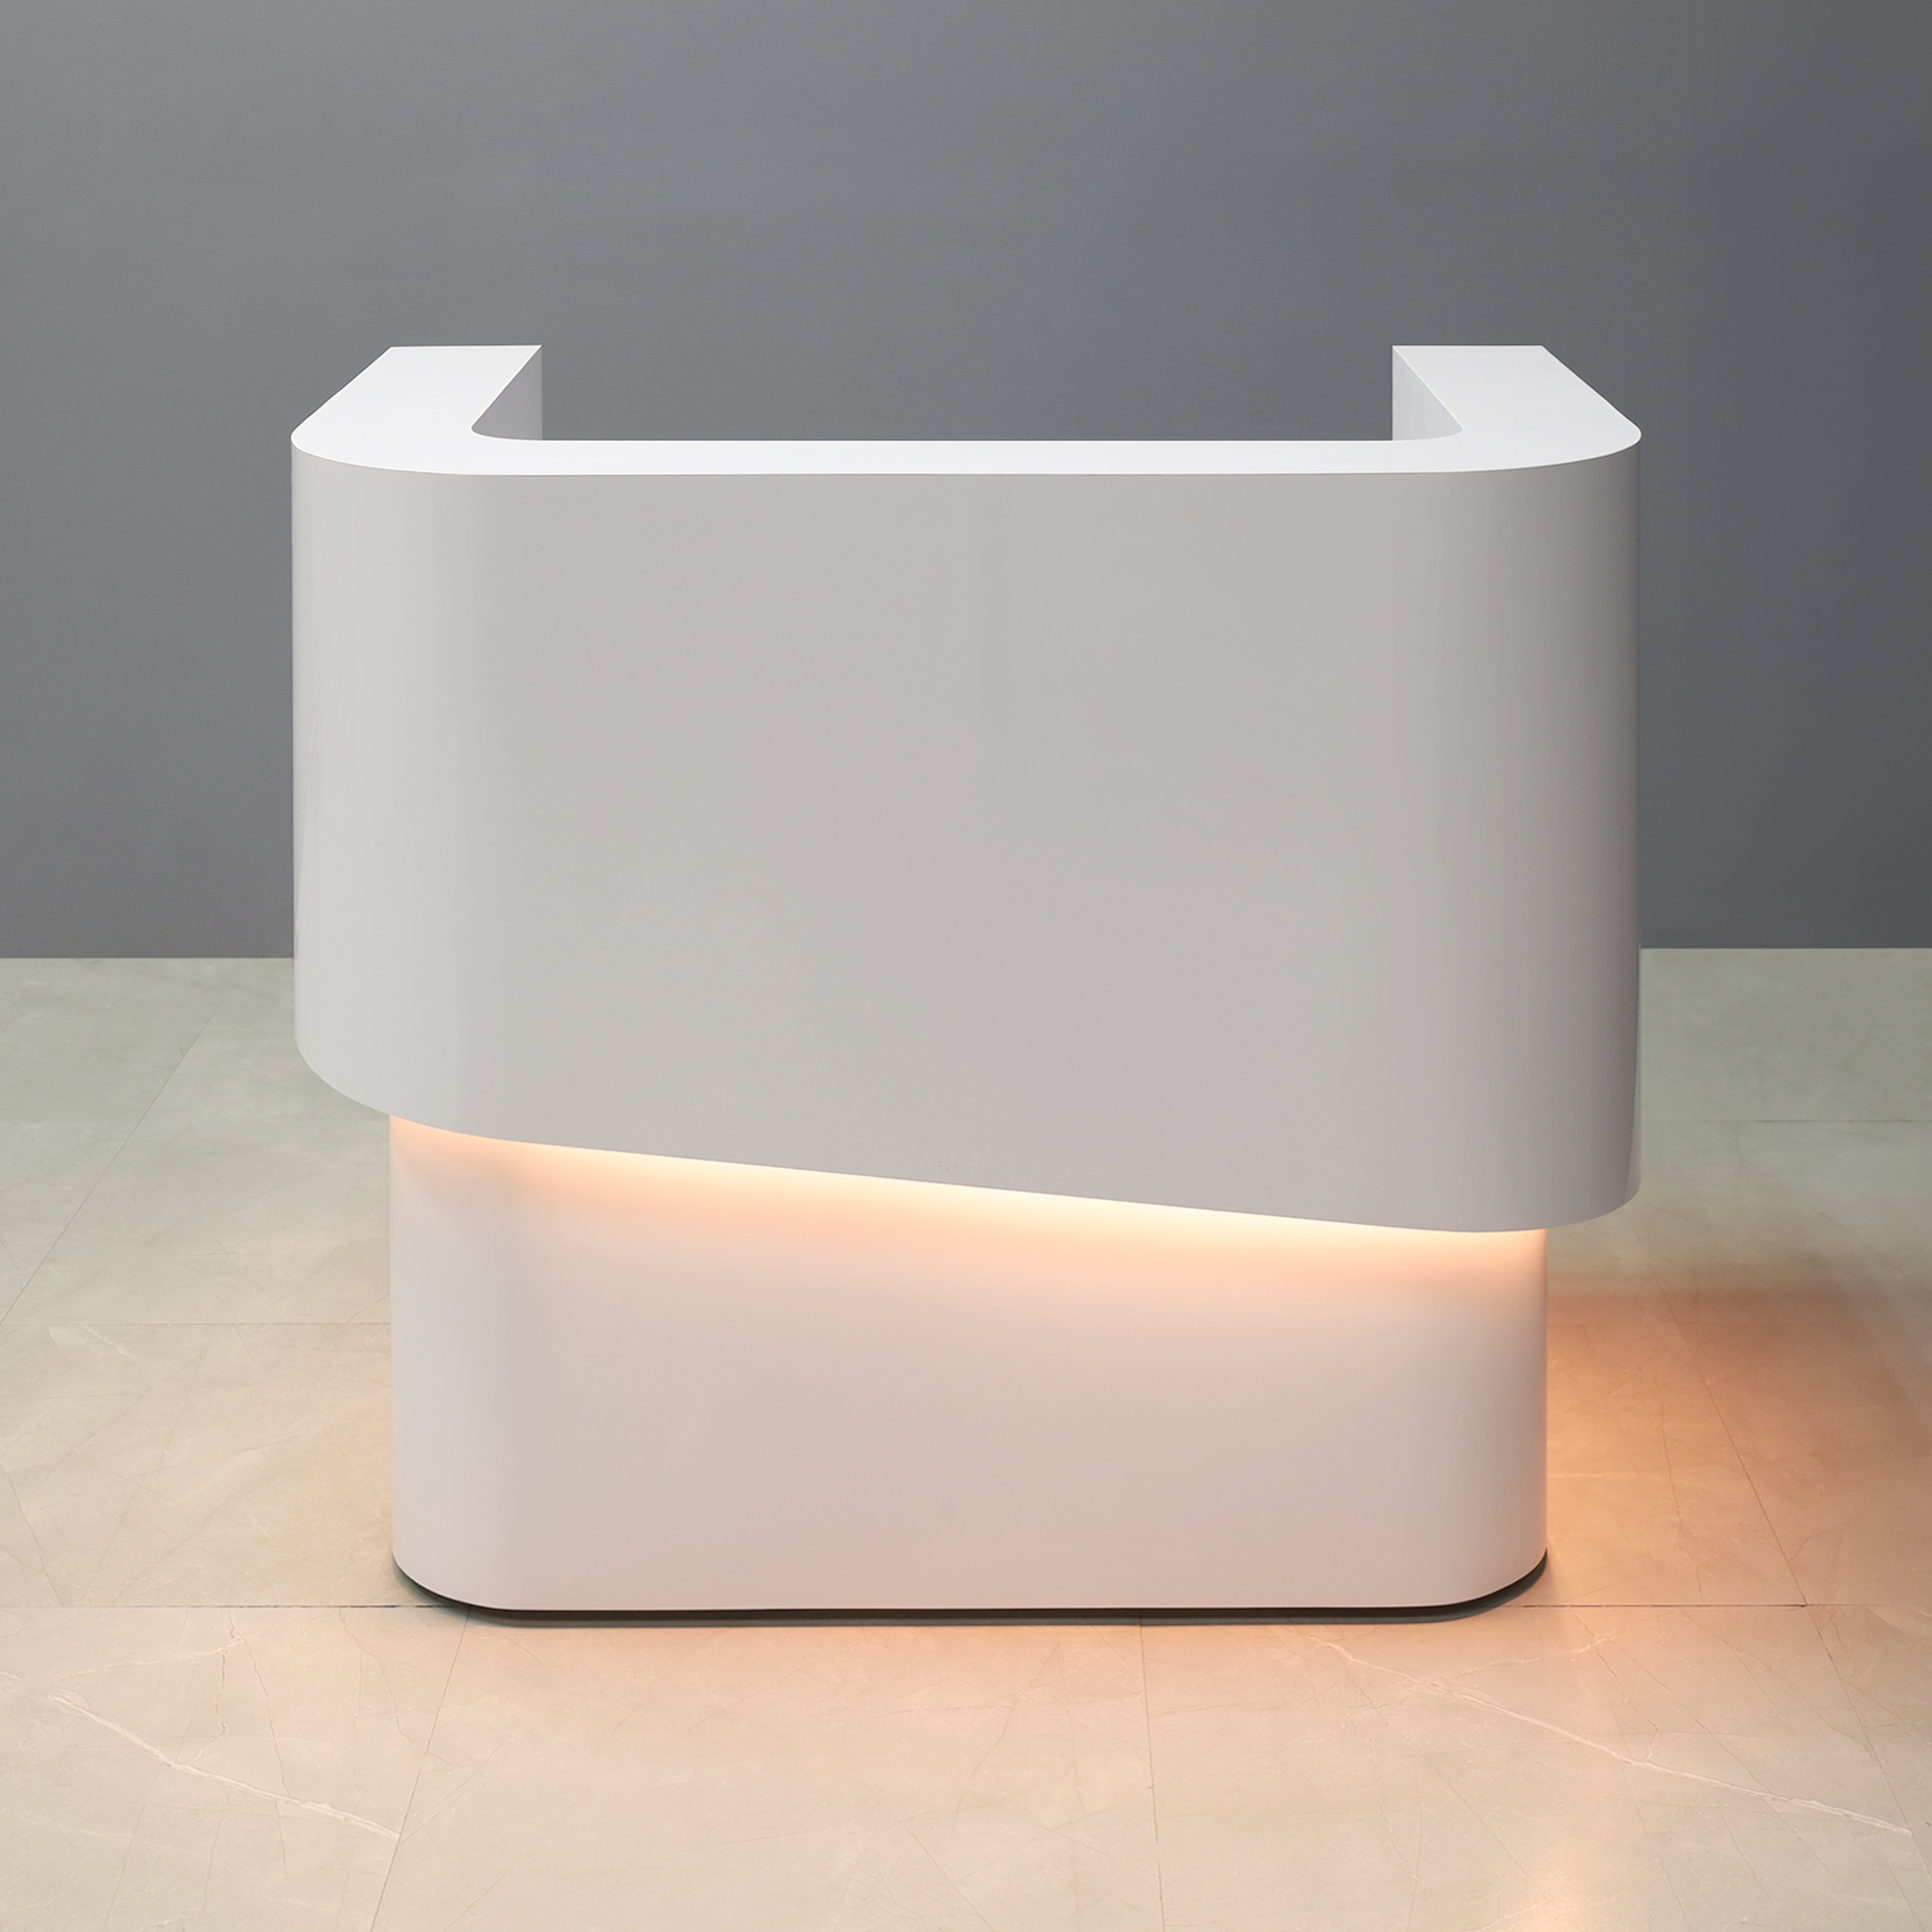 48-inch Nola Curved Custom Reception Desk in white gloss laminate counter & bottom, with warm white LED, shown here.